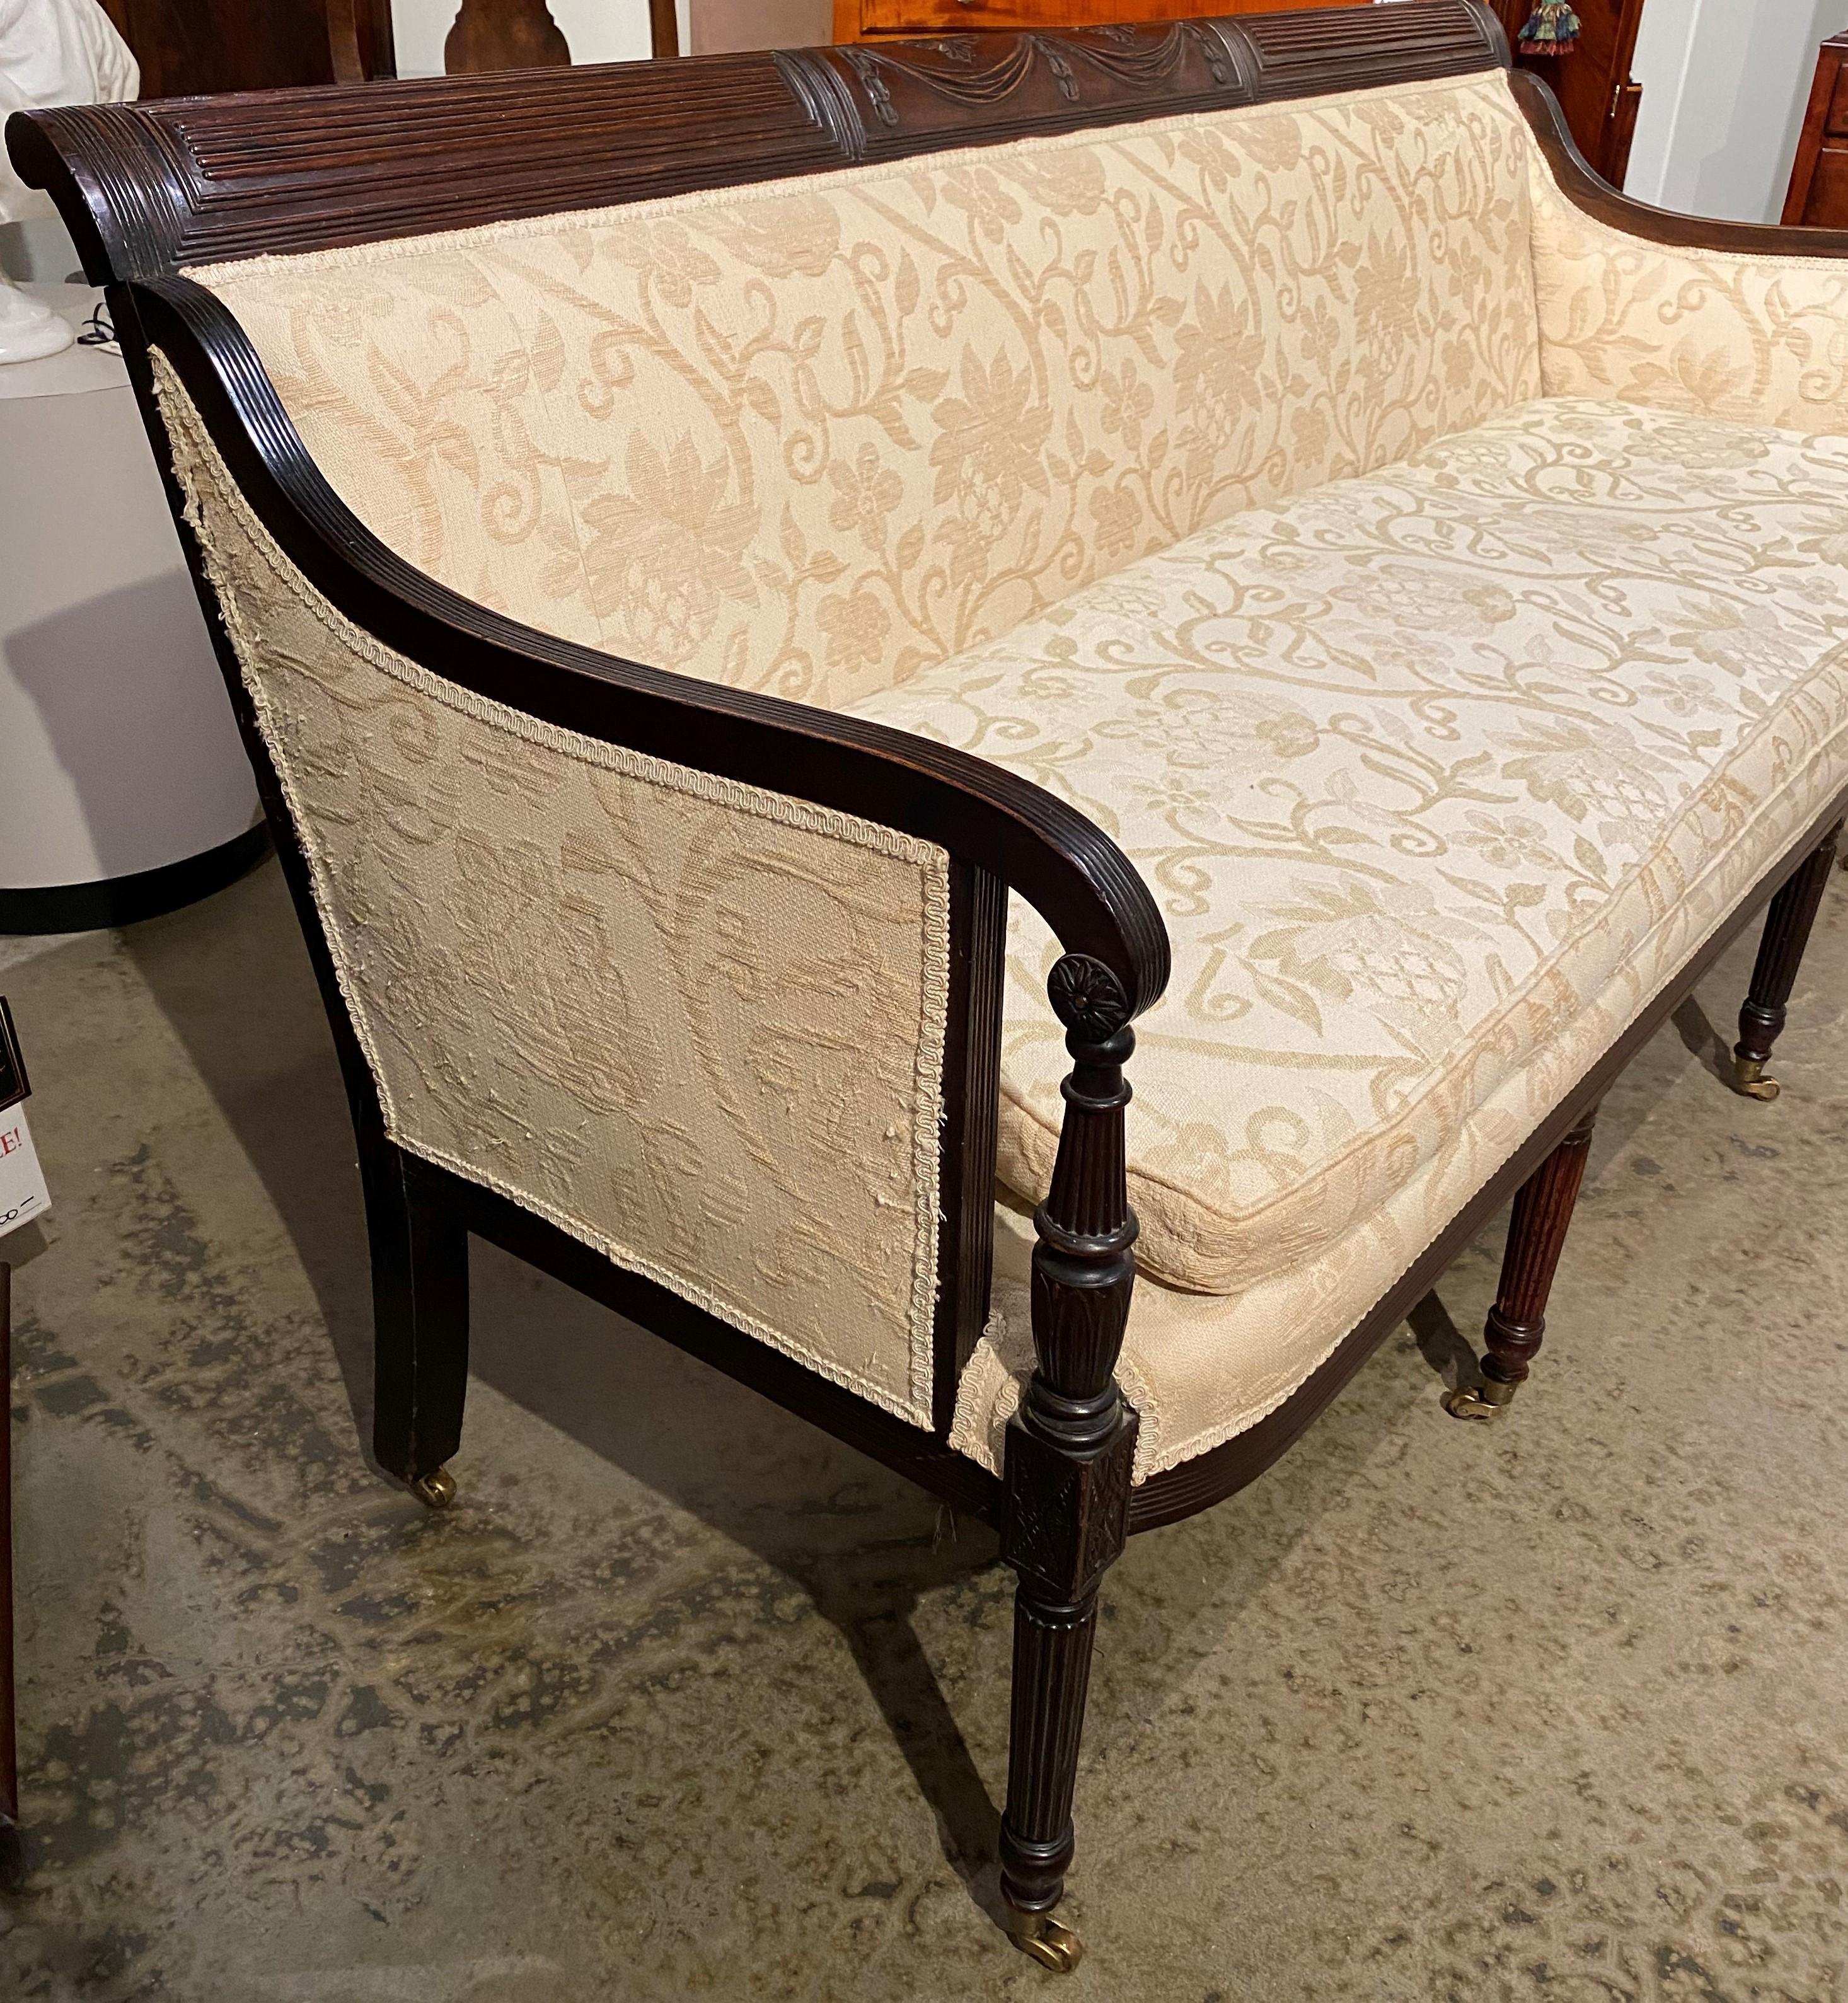 Colonial Revival Duncan Phyfe Style Federal Mahogany Sofa Attrib. to the Ernest F. Hagen Workshop